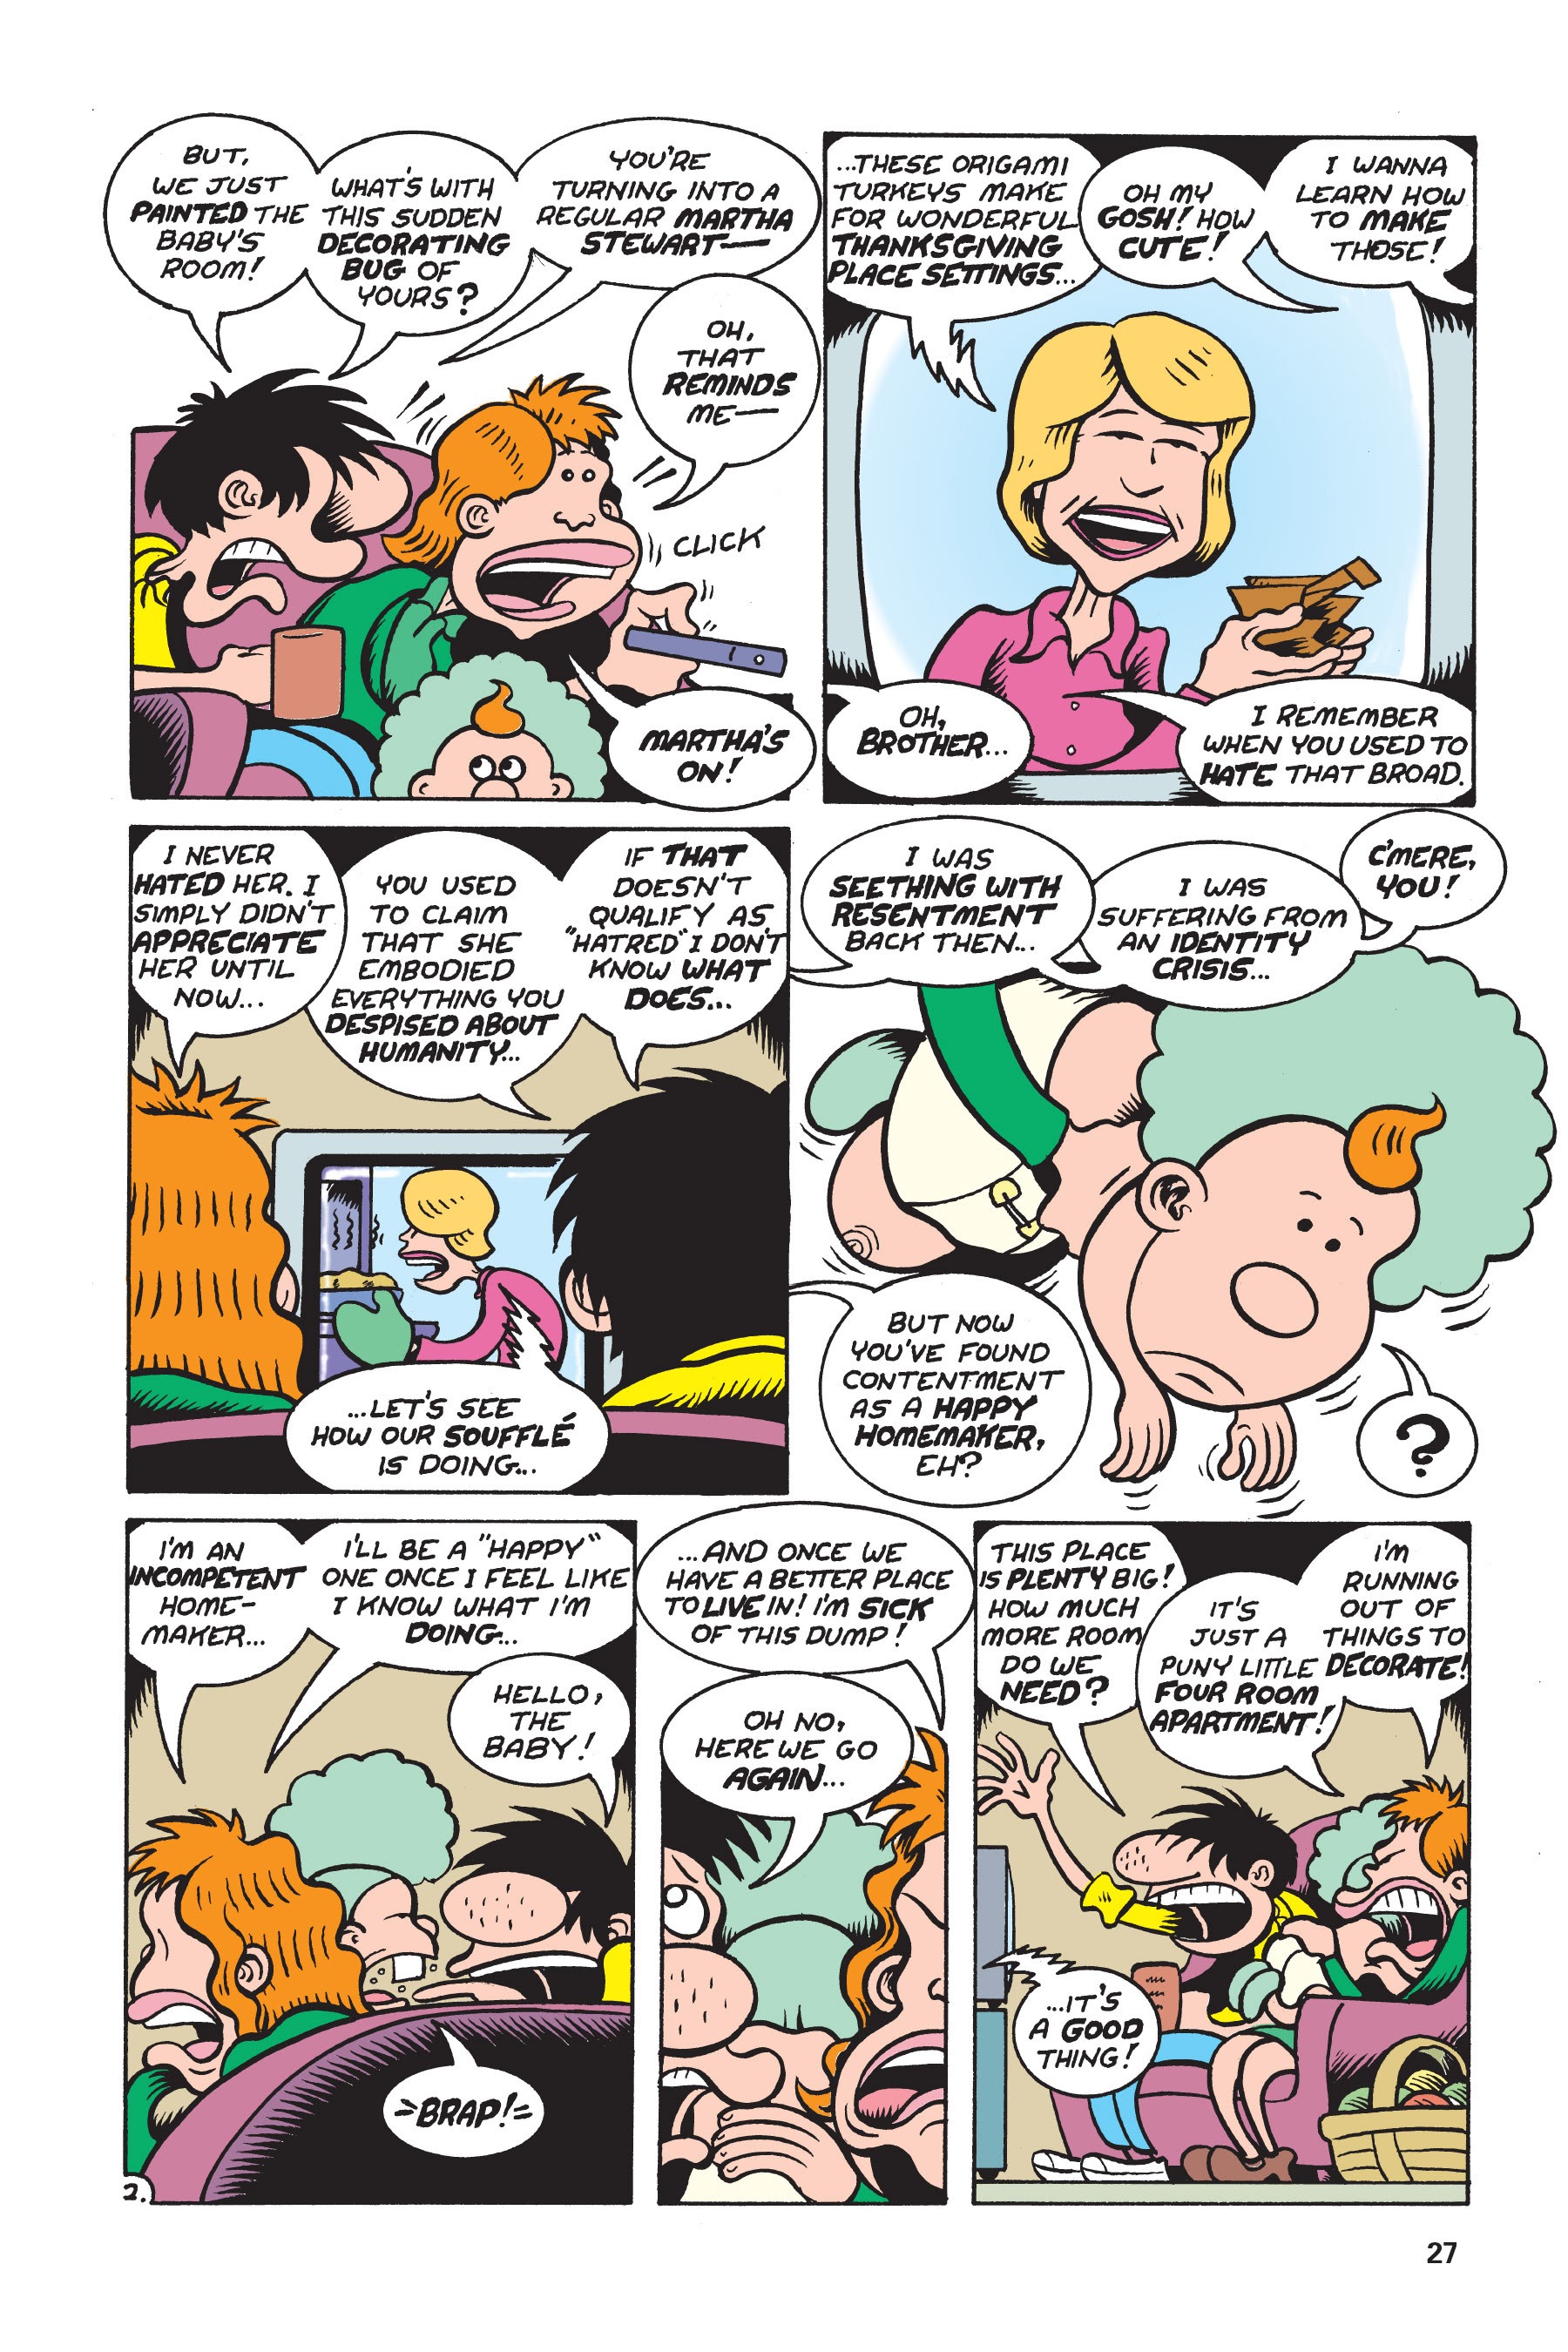 Read online Buddy Buys a Dump comic -  Issue # TPB - 27